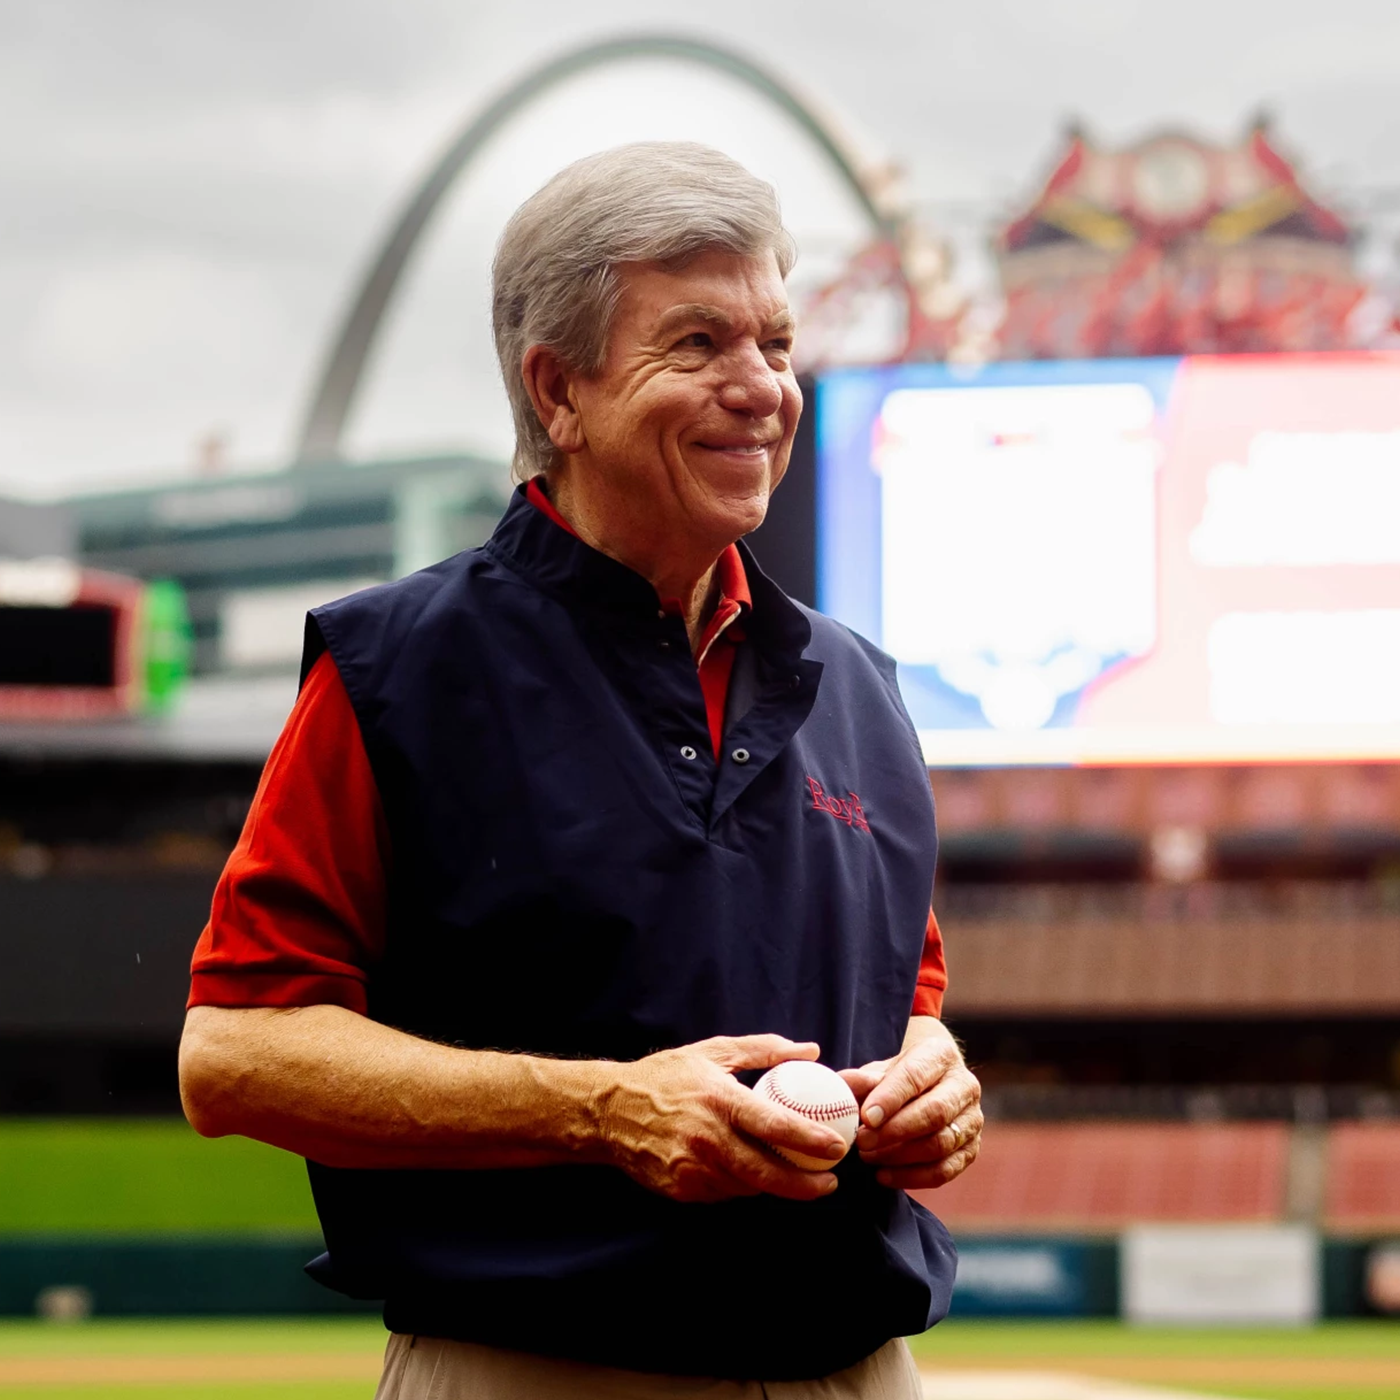 Roy Blunt looks back at his life and career